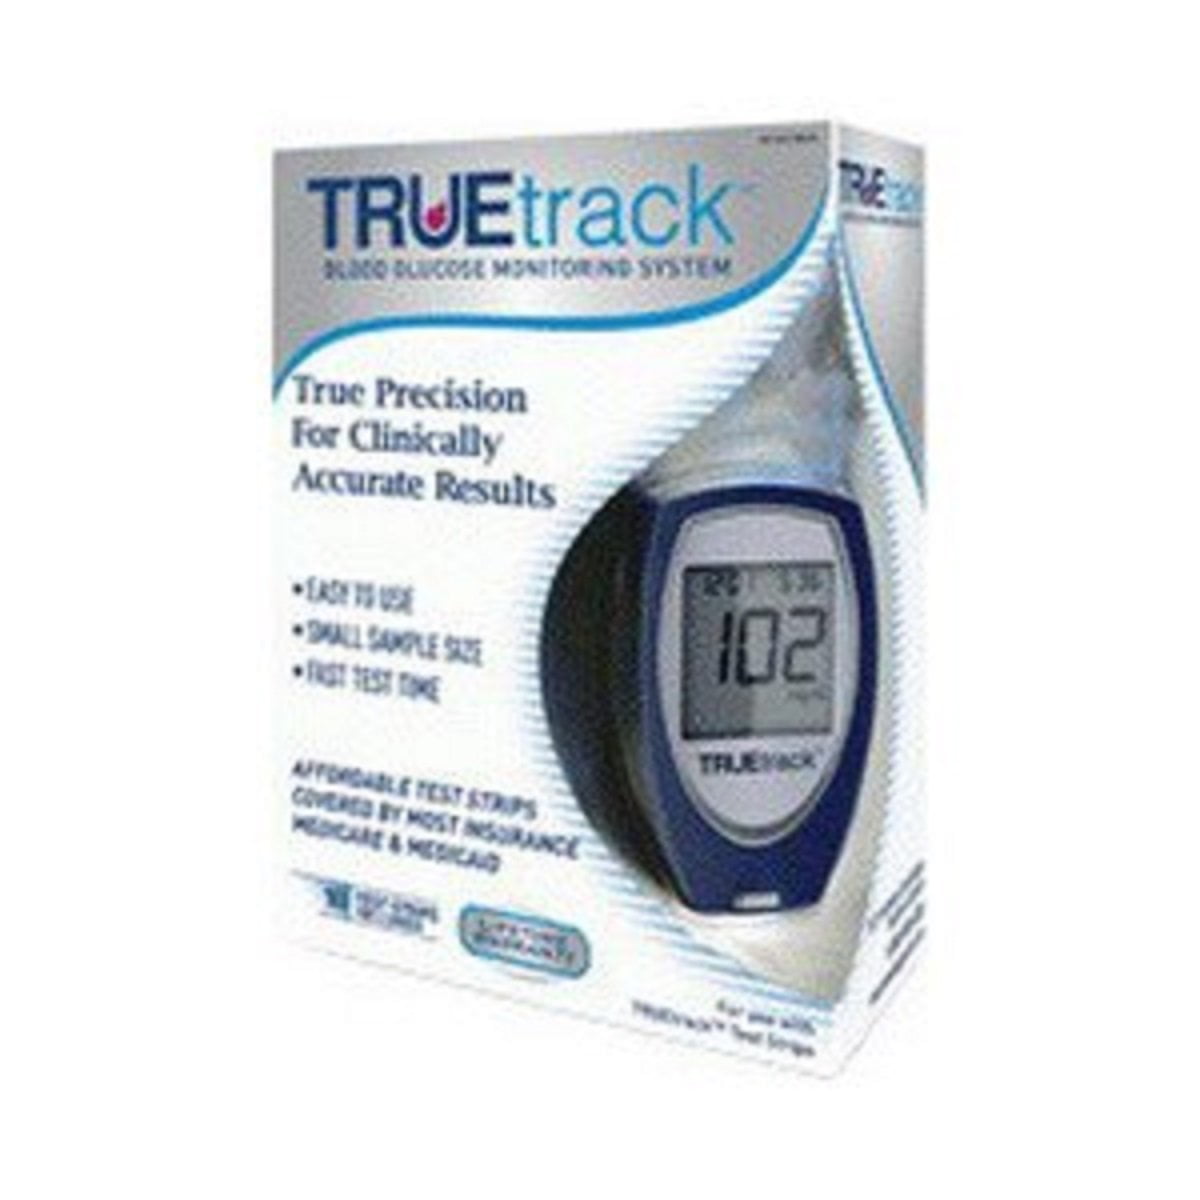 True track. Glucose monitoring Systems erius Maquet.